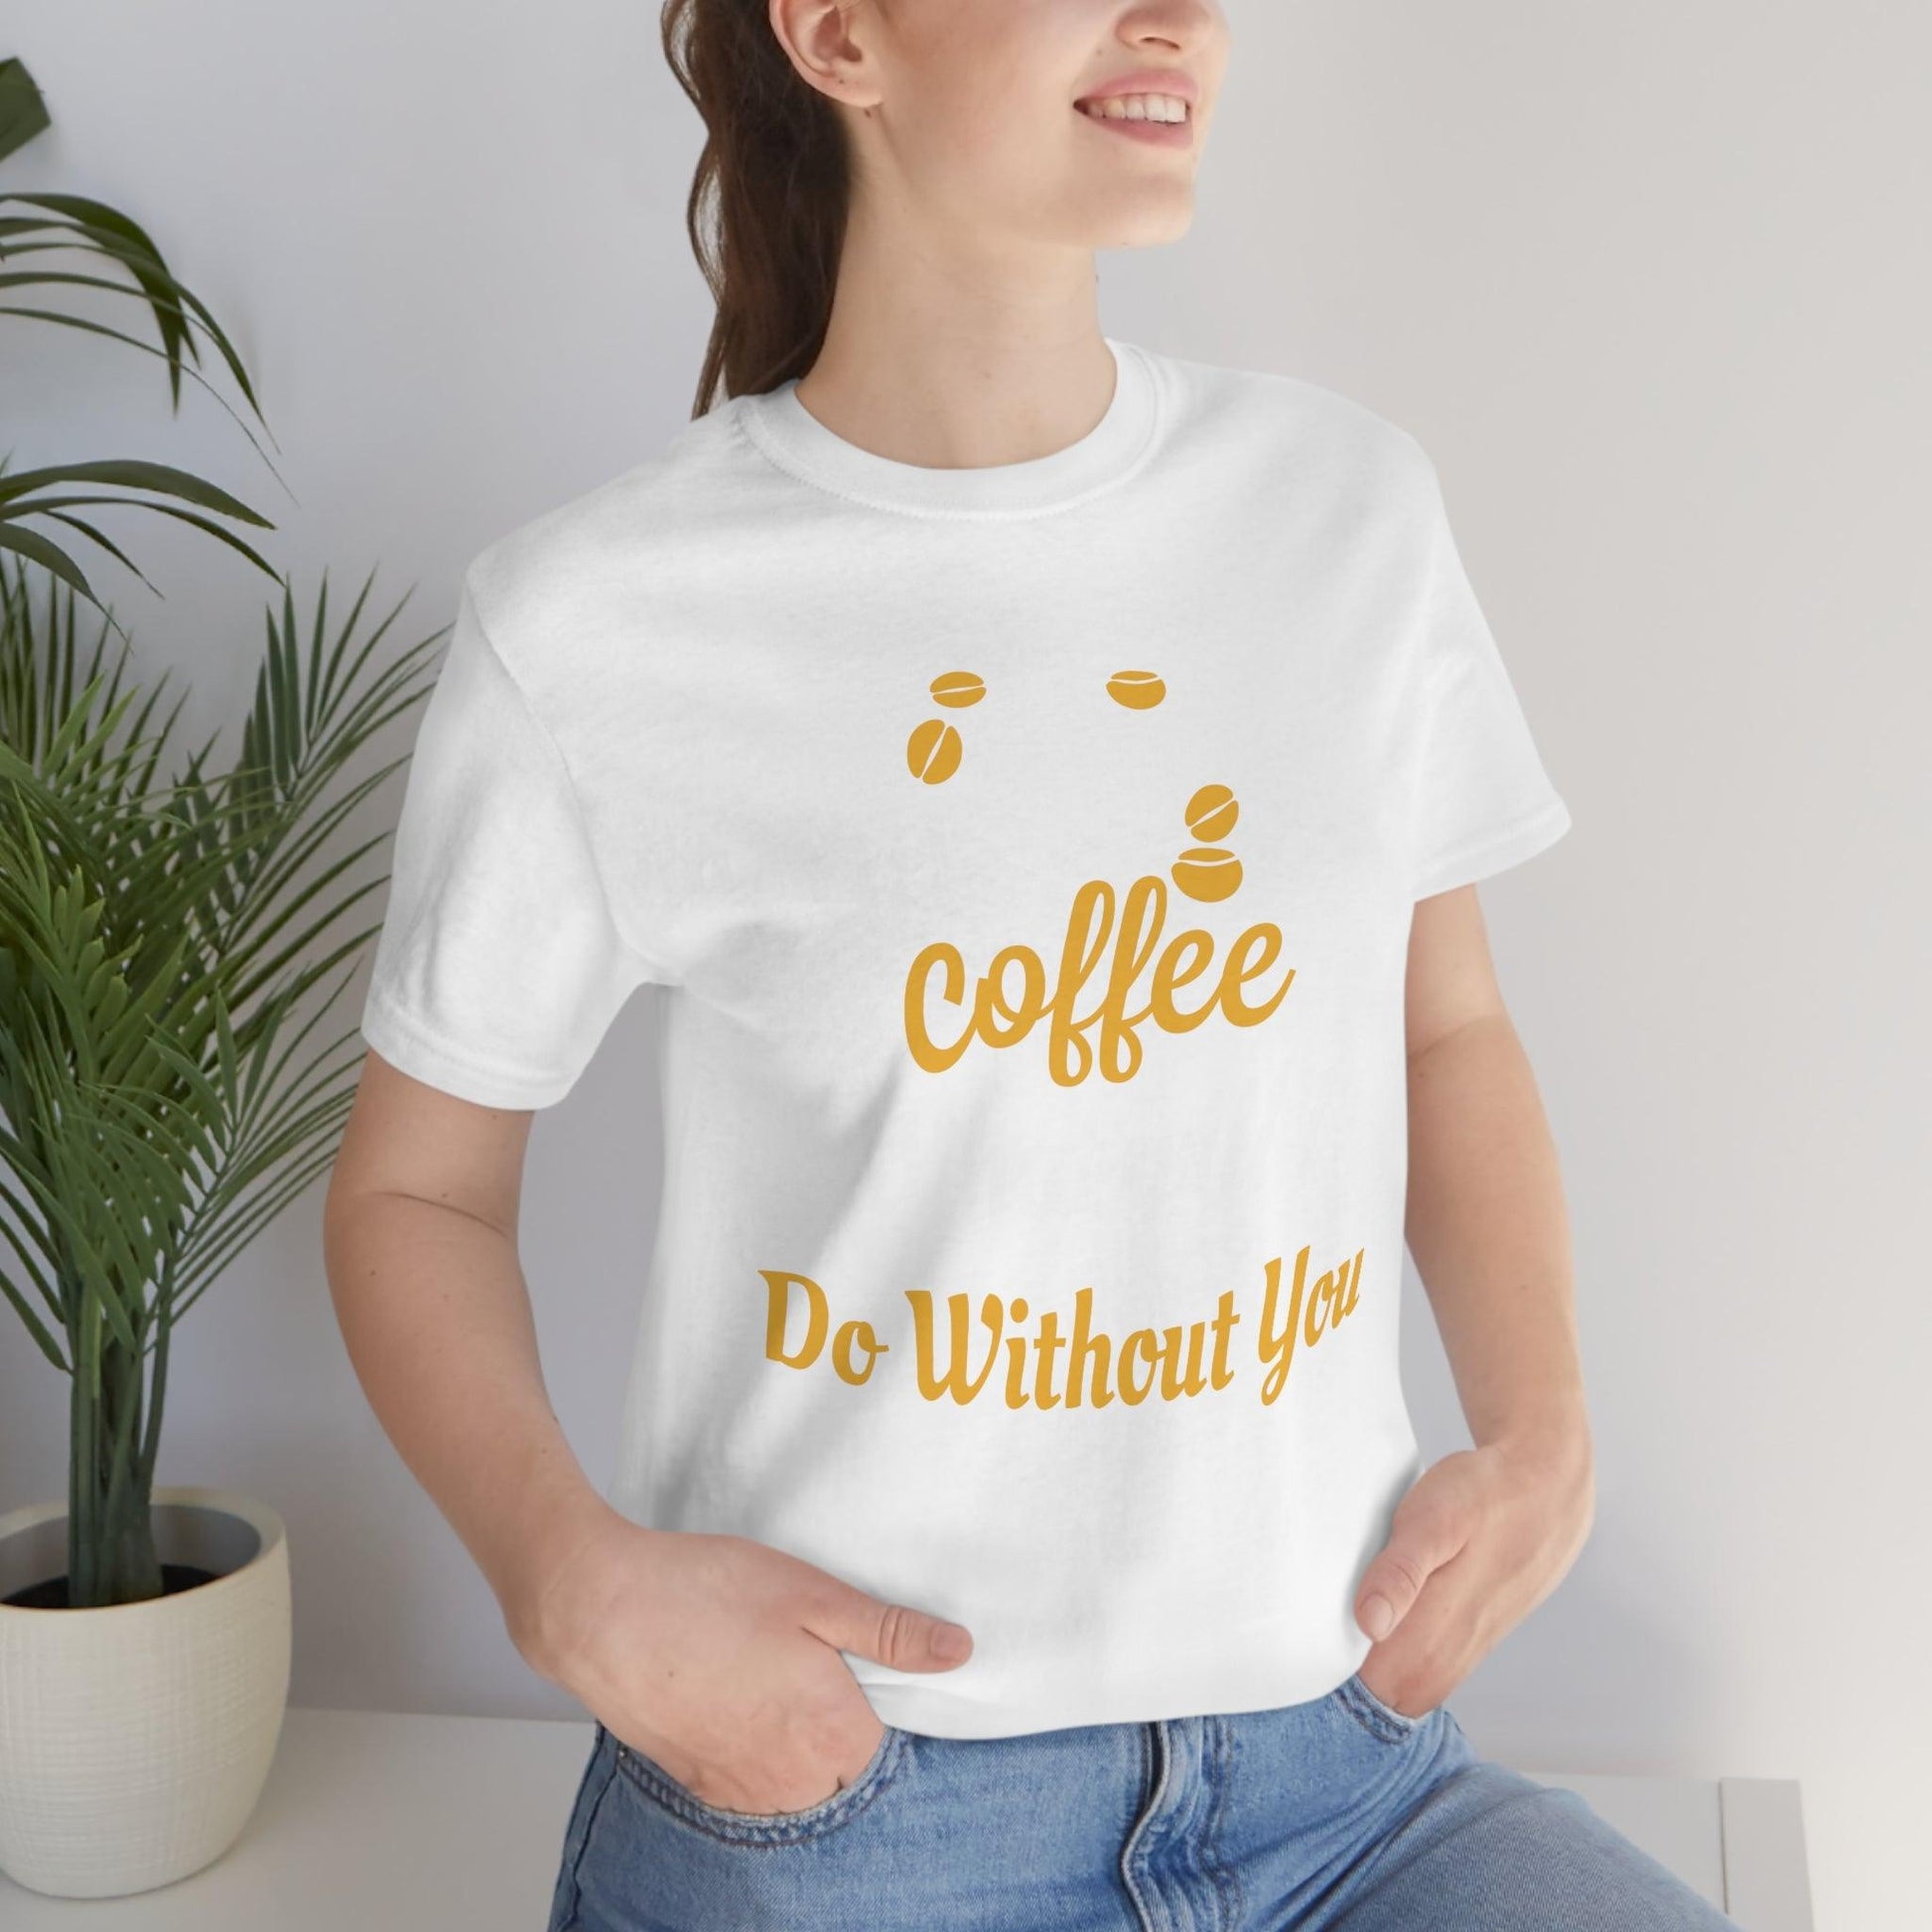 Oh Coffee what will I do without you Tee - Giftsmojo